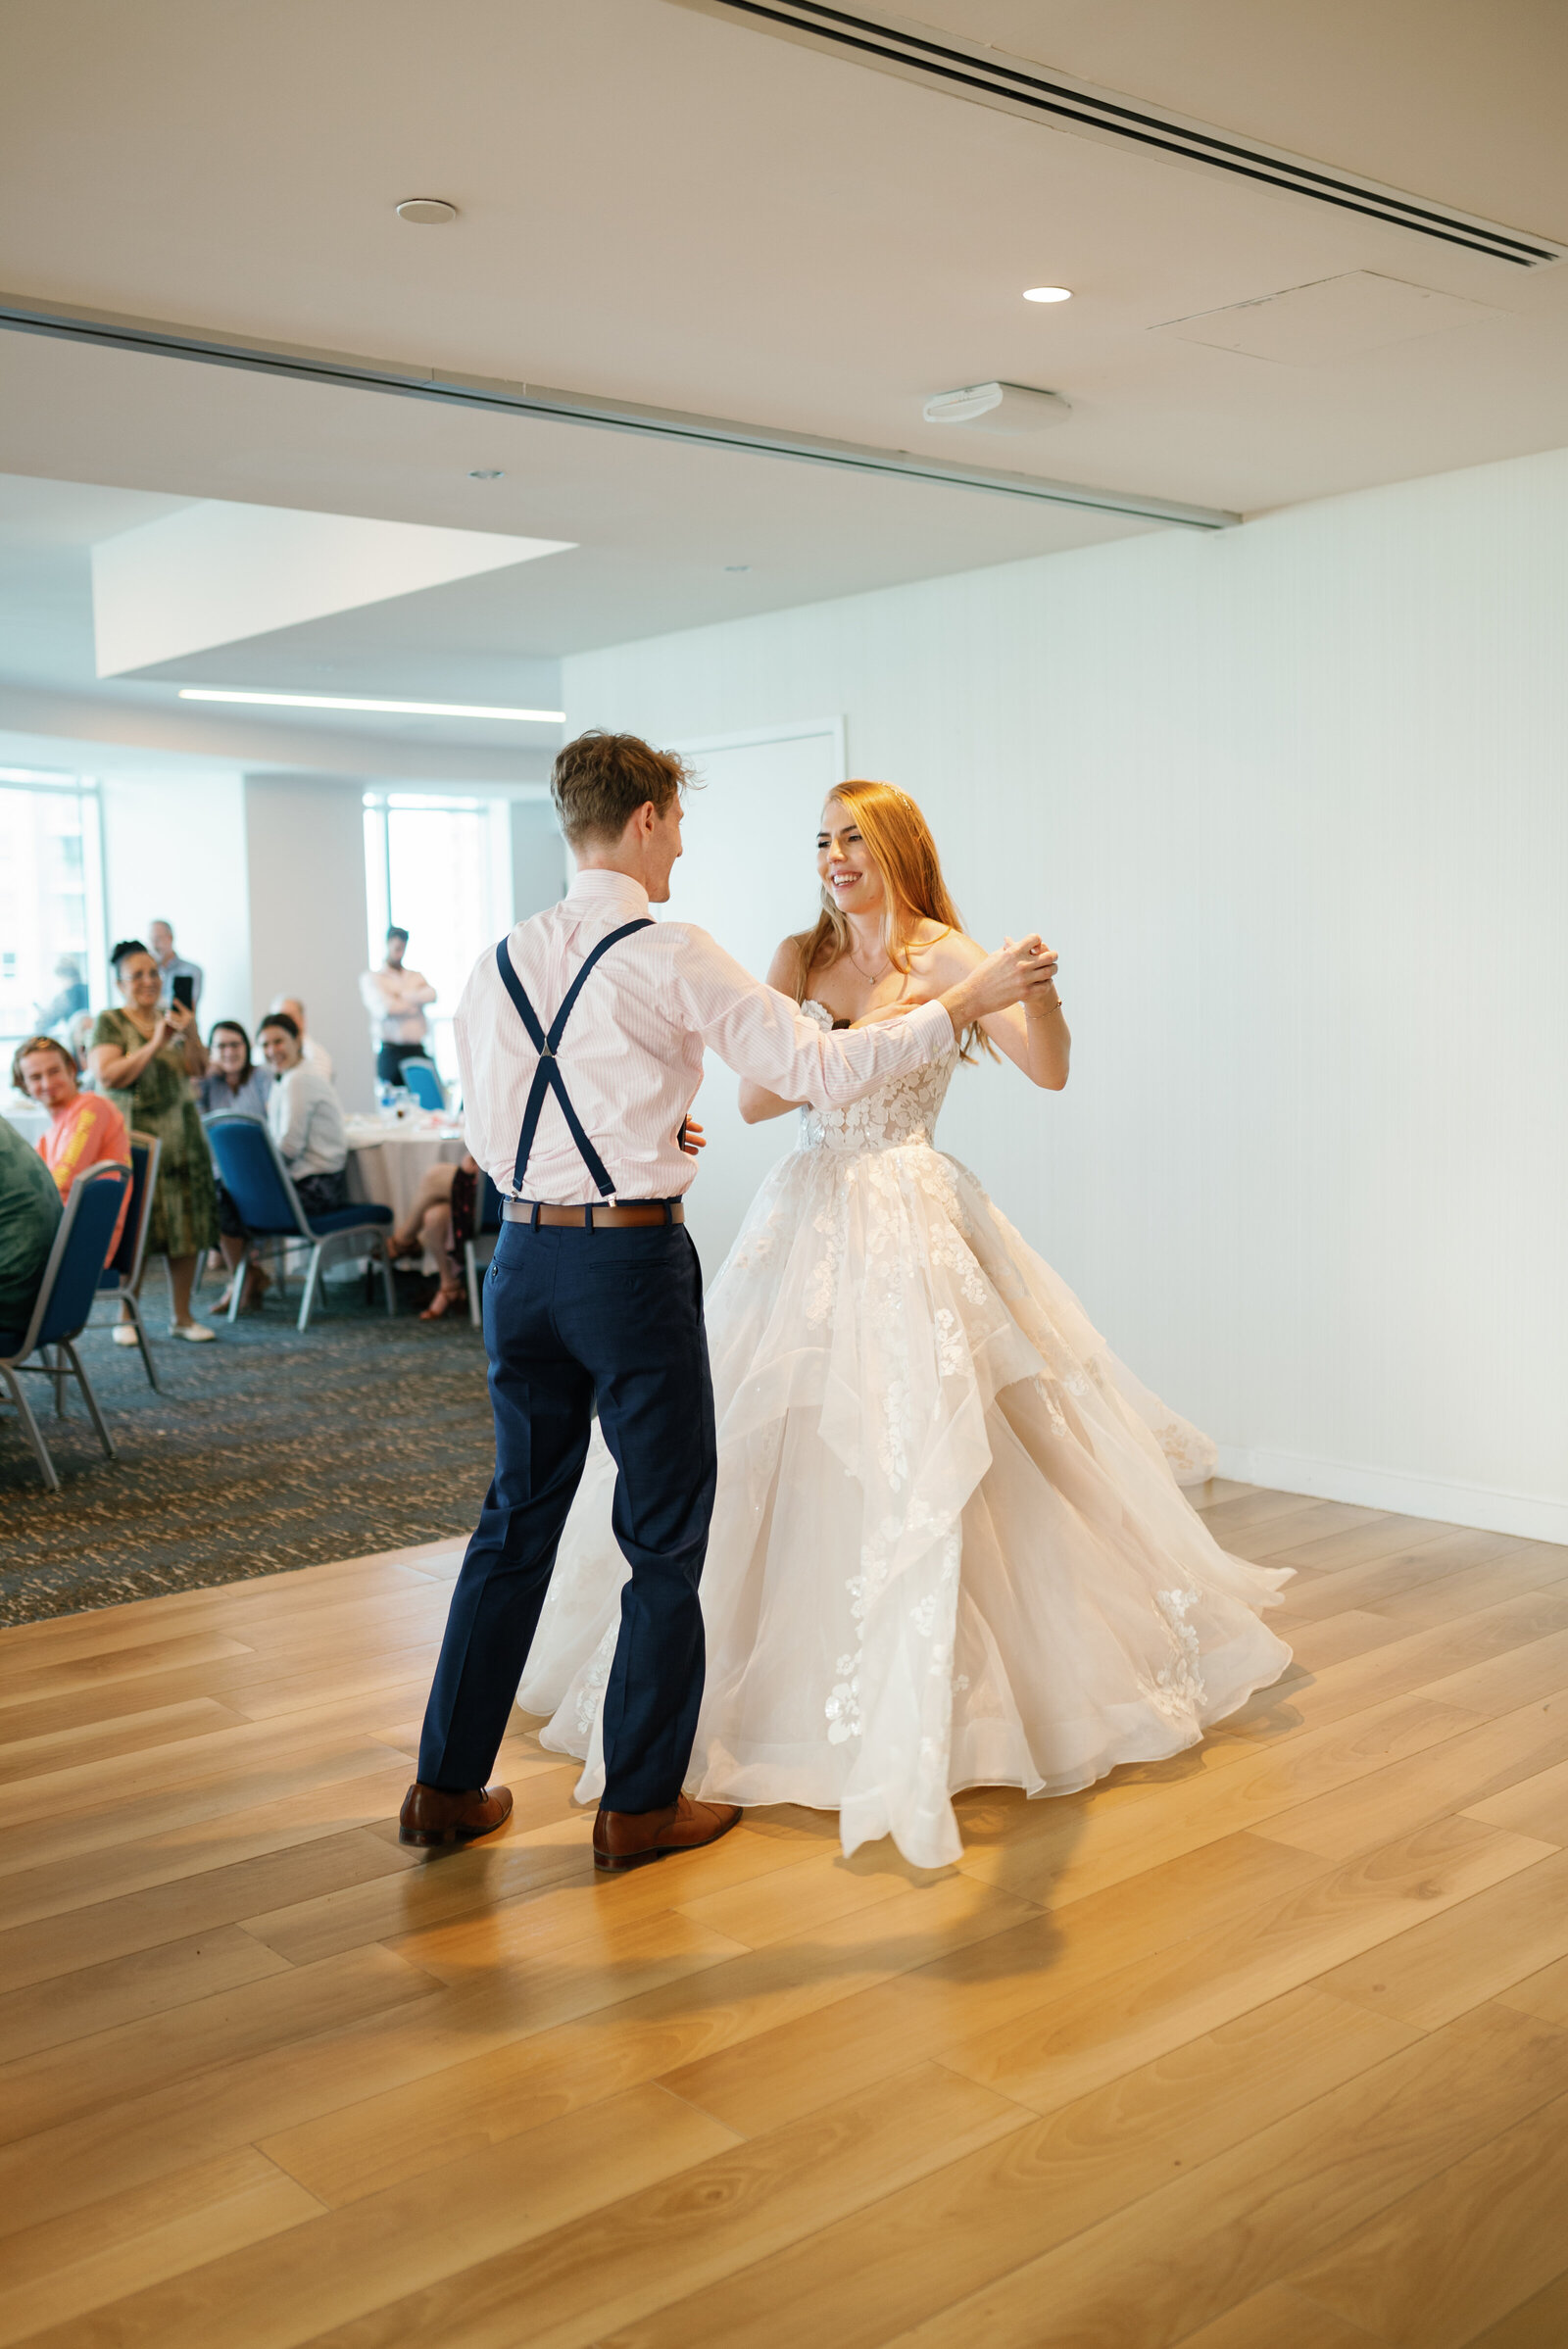 Bride and groom having their first dance together